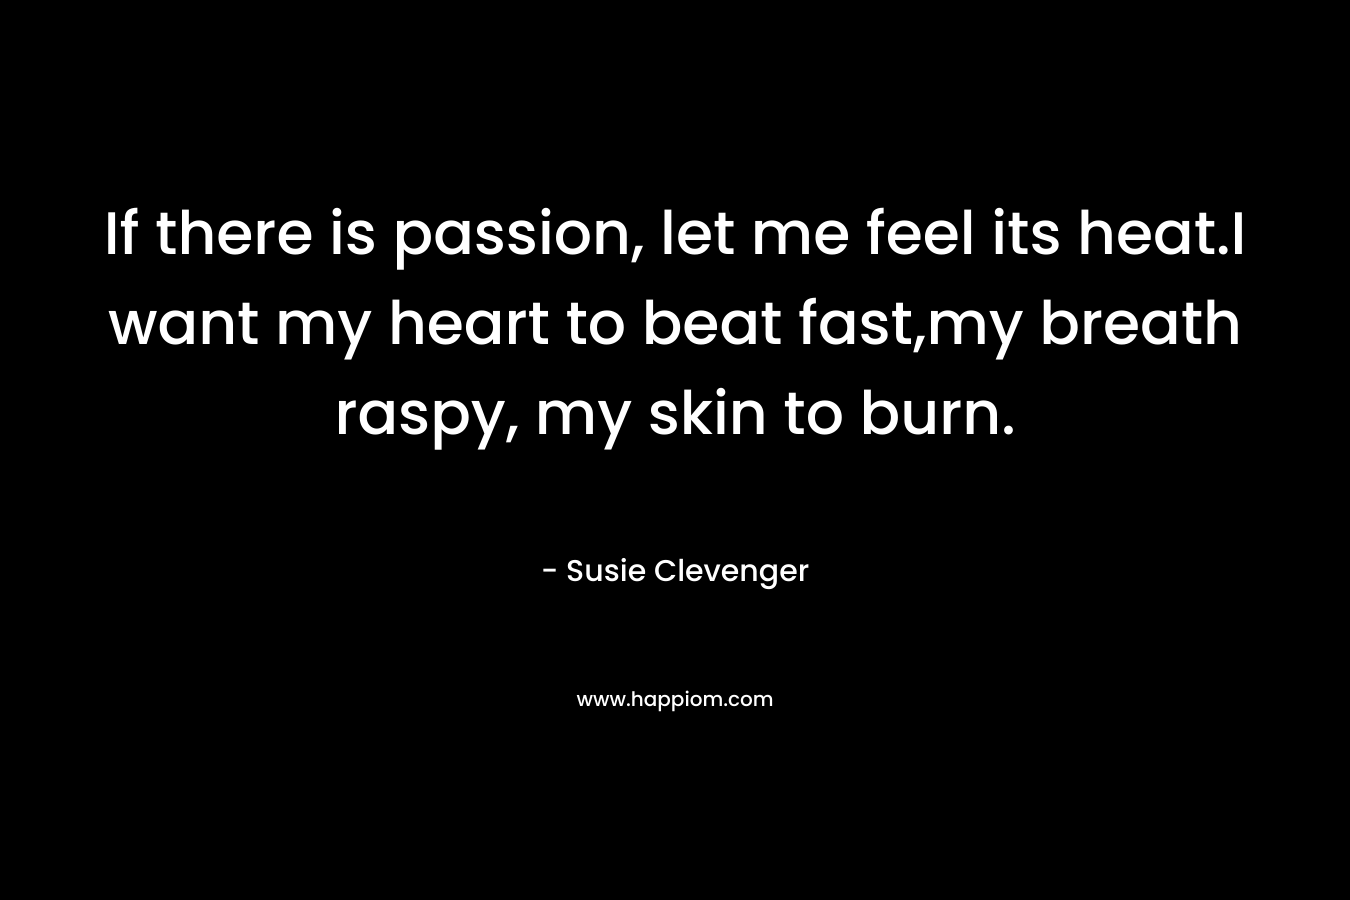 If there is passion, let me feel its heat.I want my heart to beat fast,my breath raspy, my skin to burn.